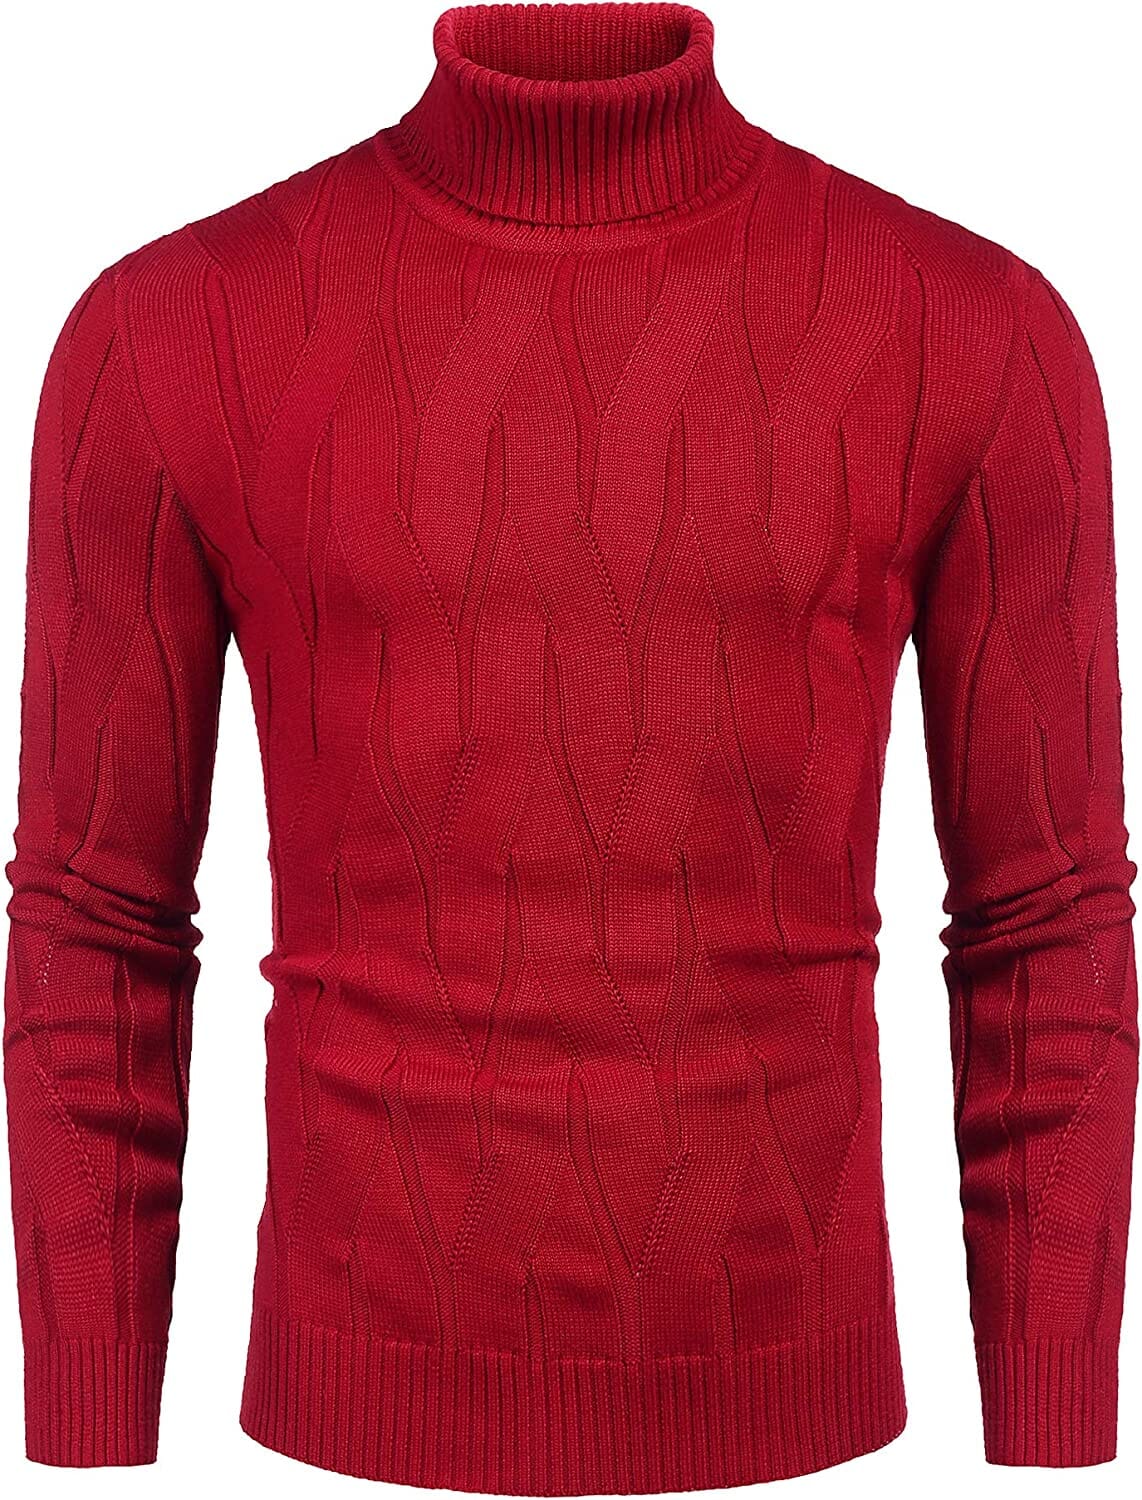 Slim Fit Turtleneck Knitted Pullover Sweaters (US Only) Sweaters Coofandy's Red S 